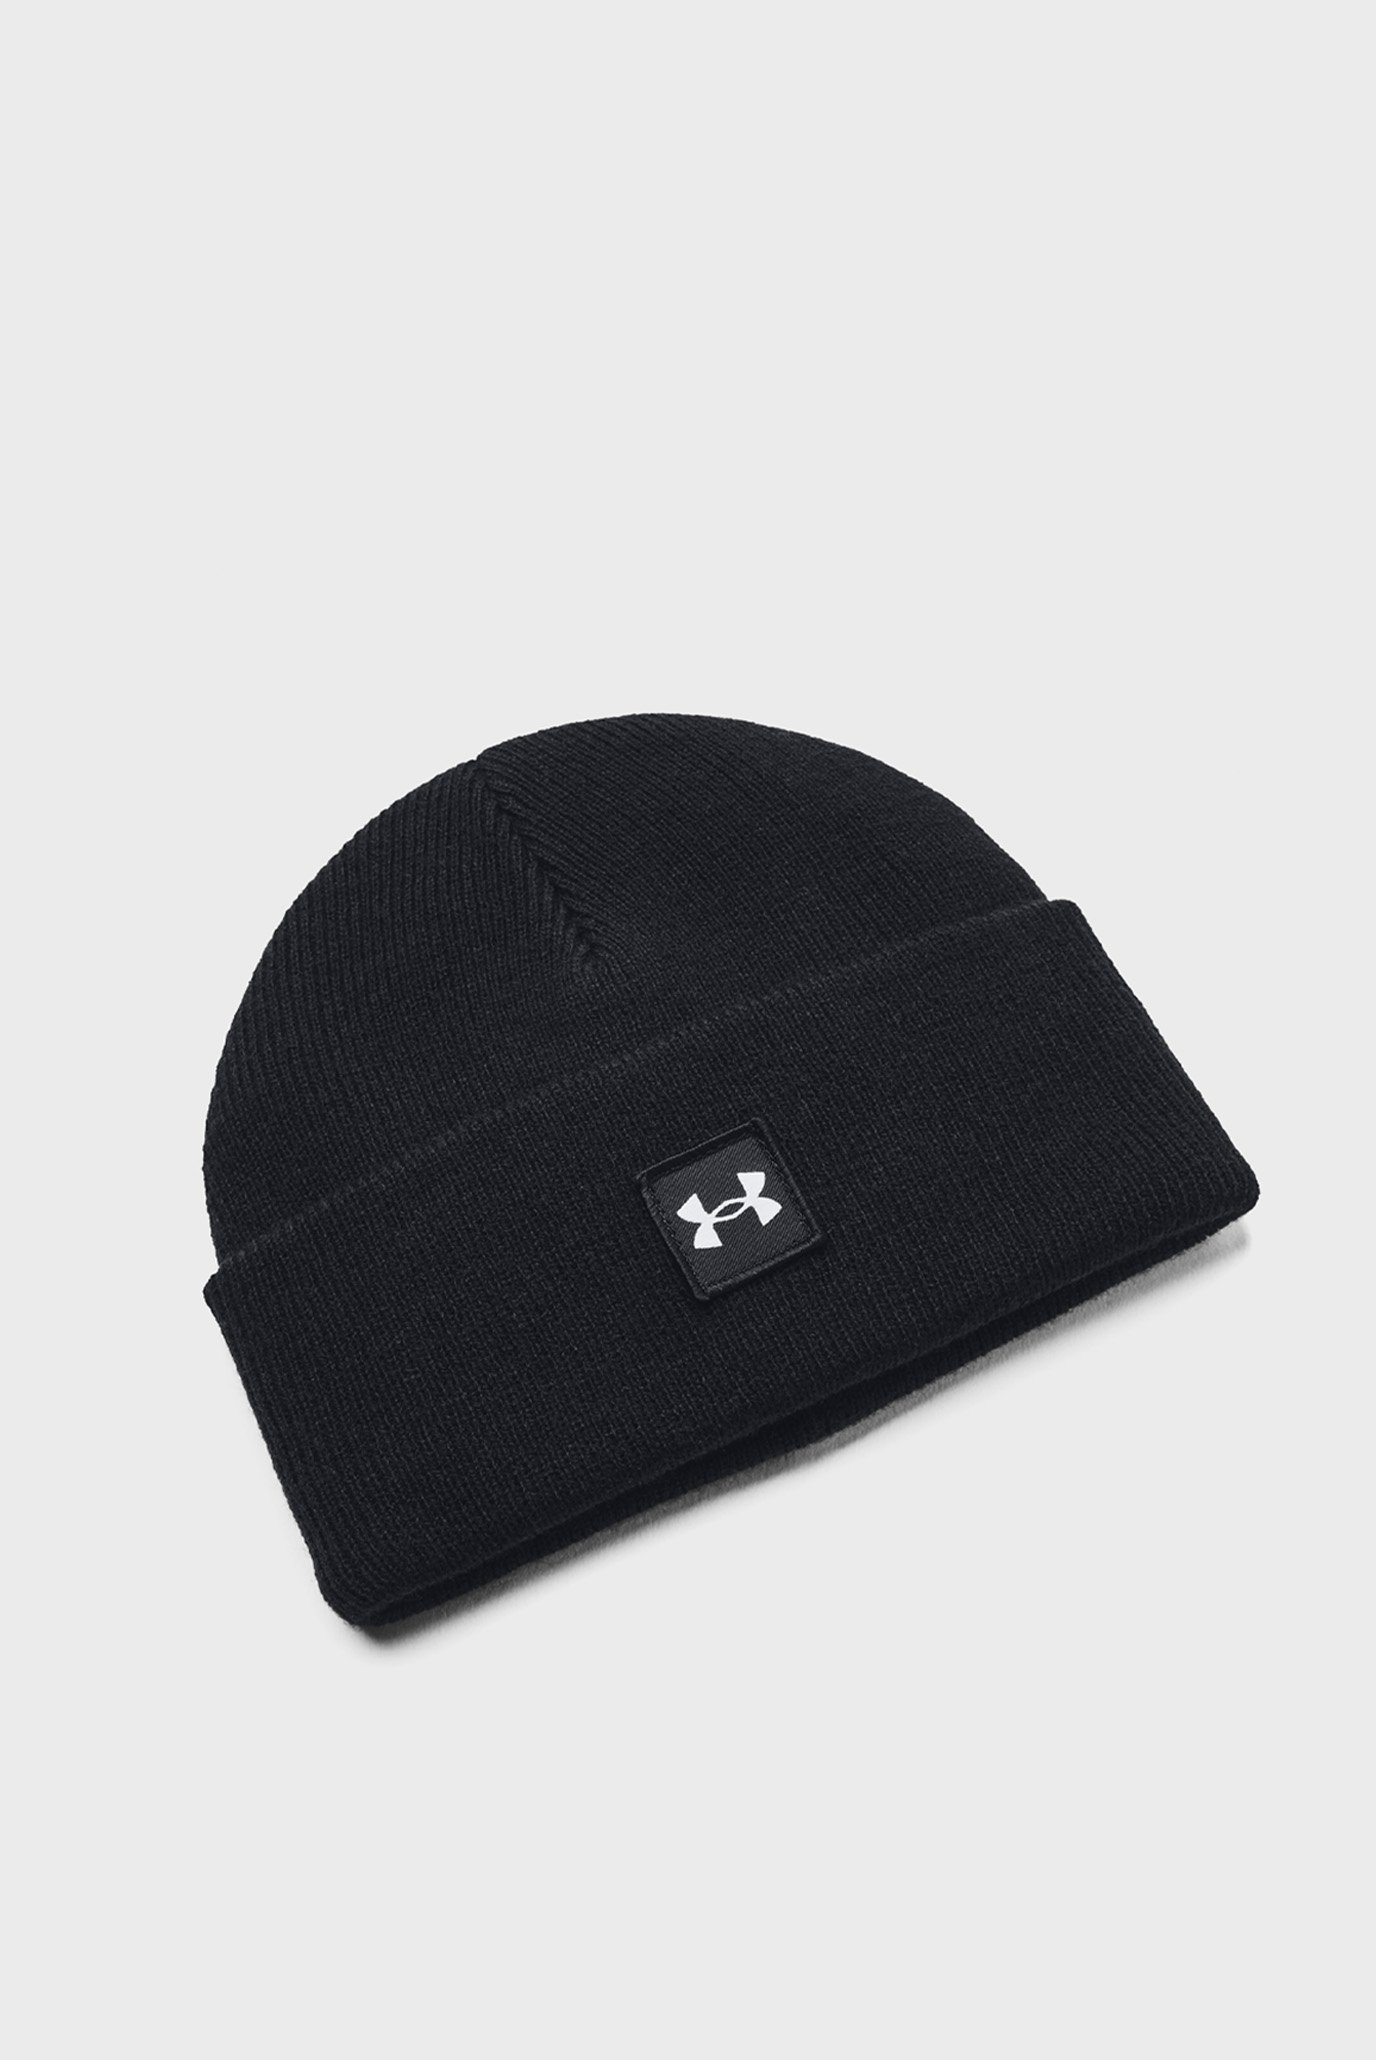 free shipping! prompt decision![MD size ] Under Armor UNDER ARMOUR UA  unisex training cuff sleeve Kafka bar [. sweat speed ..]: Real Yahoo  auction salling